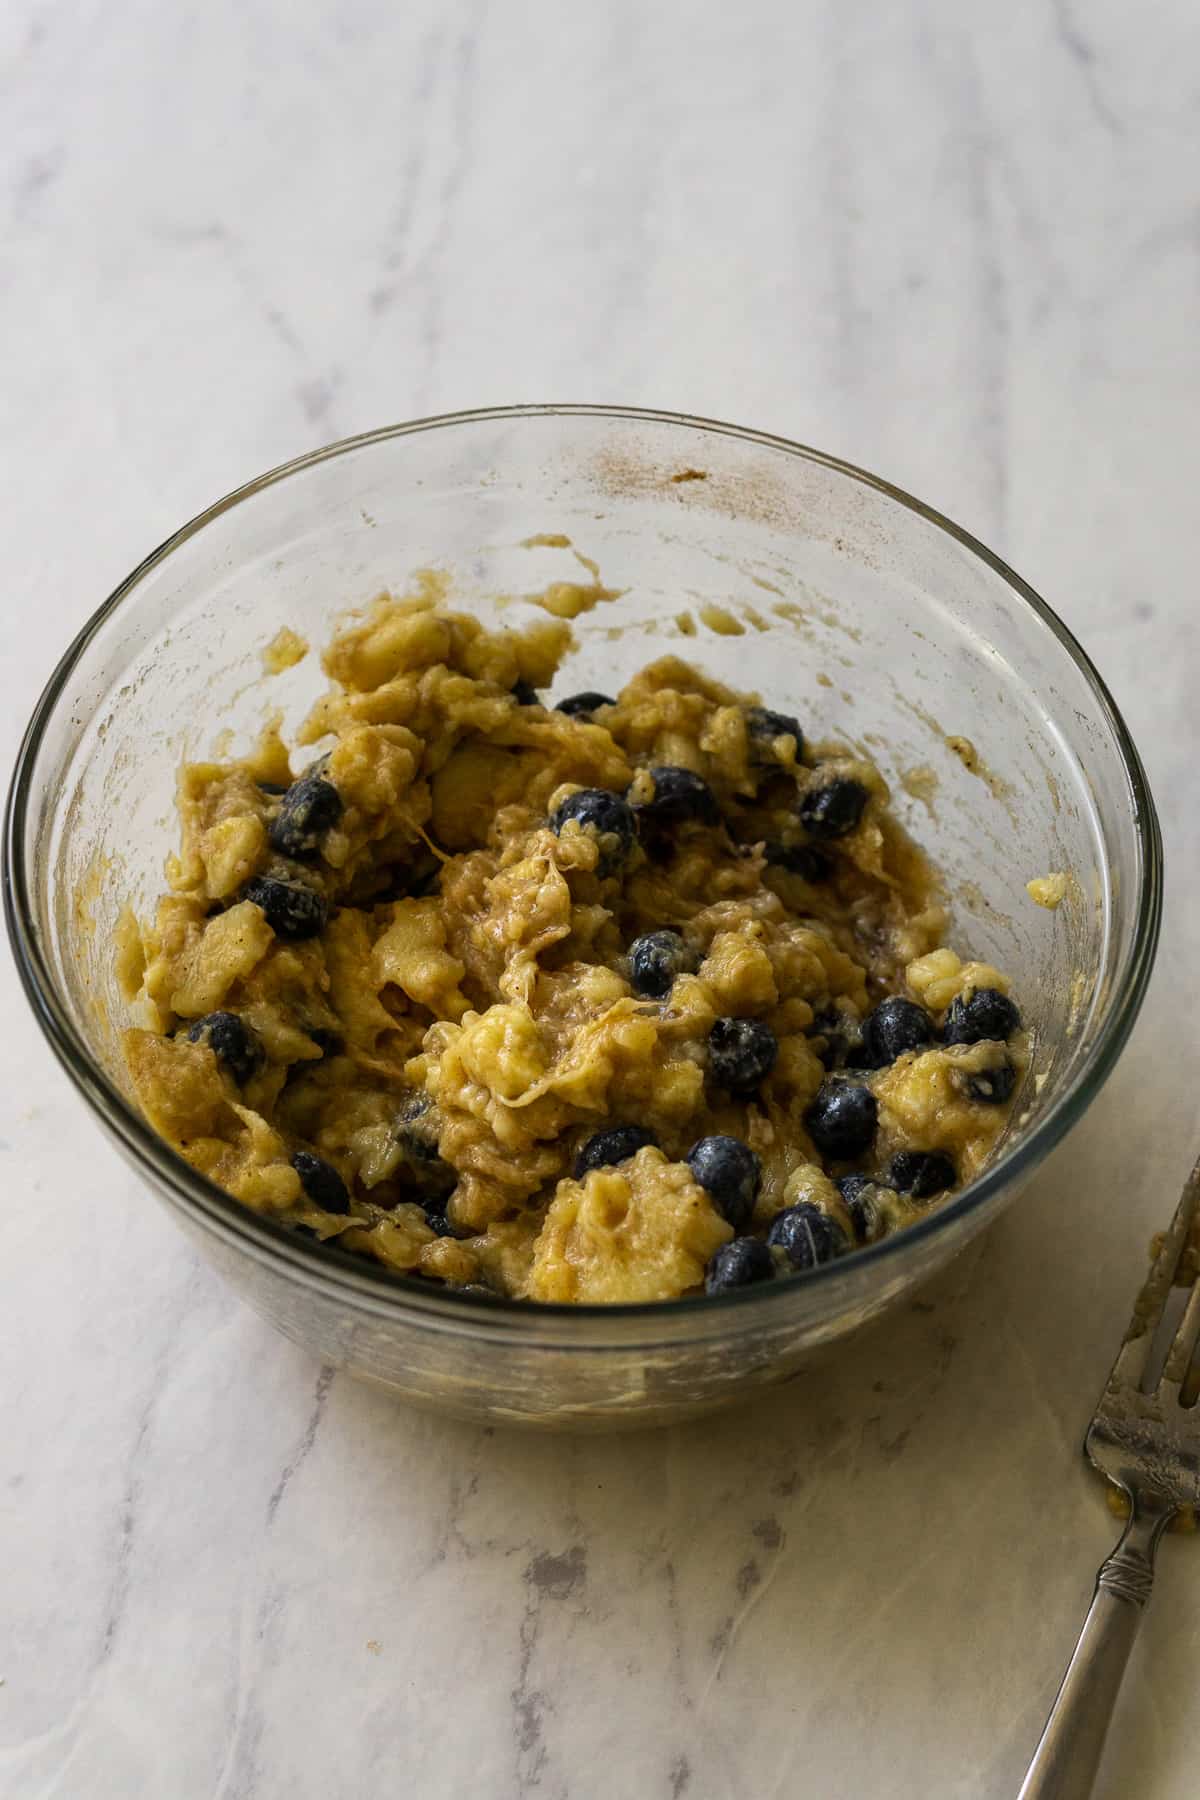 The mashed banana mixture combined with blueberries in a glass bowl. 